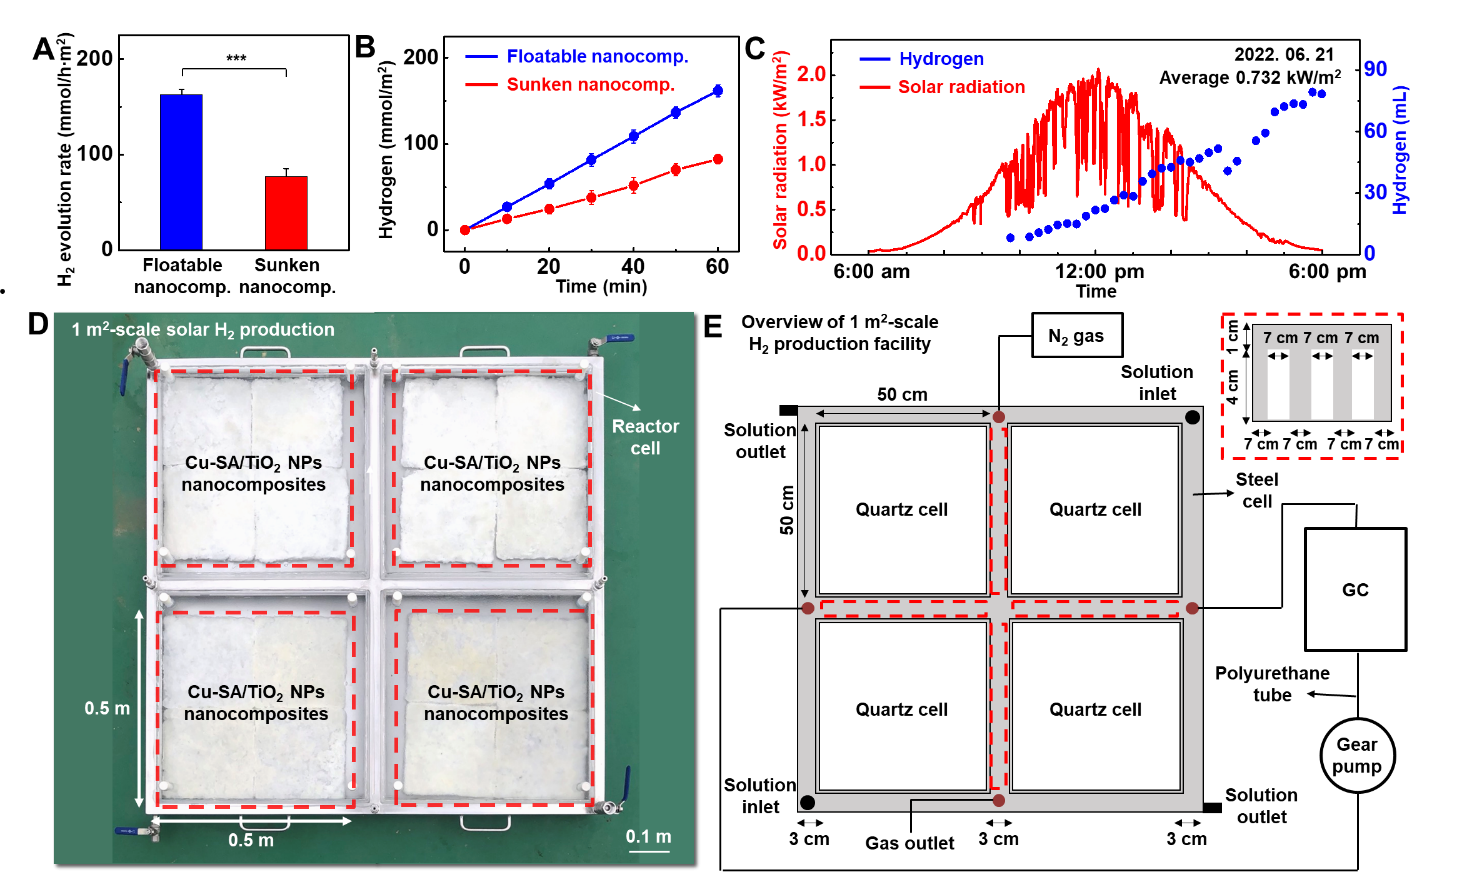 Figure 3.
        A, B. Hydrogen evolution performance of the floatable platform, compared to submerged one.
        C. Hydrogen production by floatable platform with an area of 1 m2.
        D. Optical image of the arrayed floatable platform with an area of 1 m2.
        E. Schematic illustration of the hydrogen production facility with the floatable platform with an area of 1 m2.
        